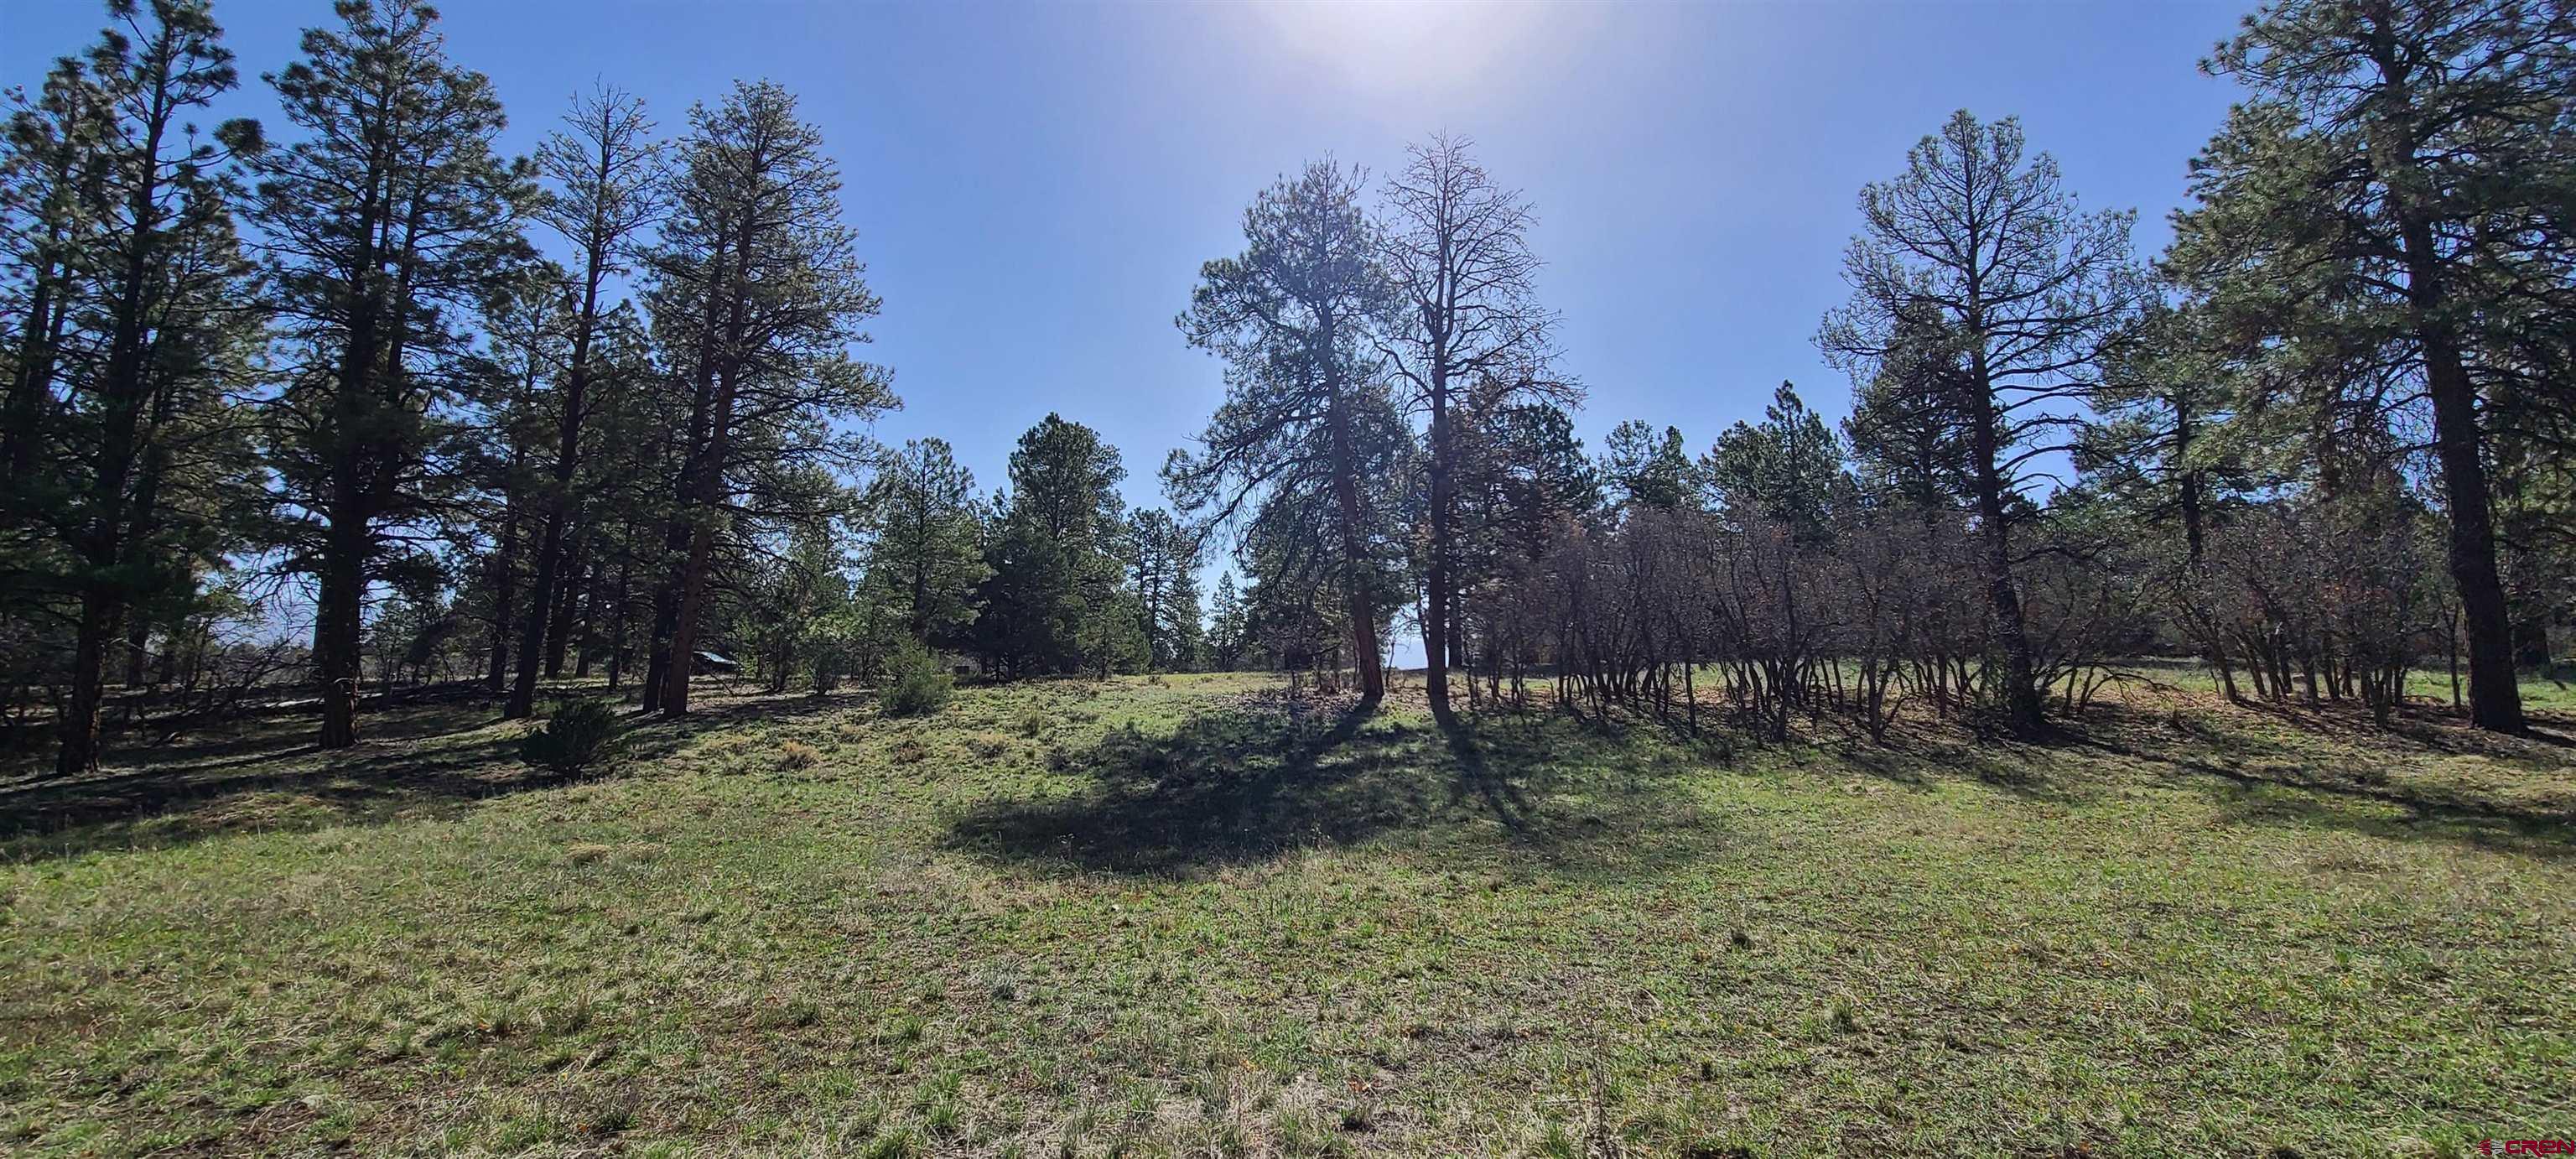 Flat buildable lot in the Divide Ranch subdivision. Nice homes up and down the street. Stately Ponderosa Pine trees. All utilities to the lot line. Covenants at fairwaypinespoa